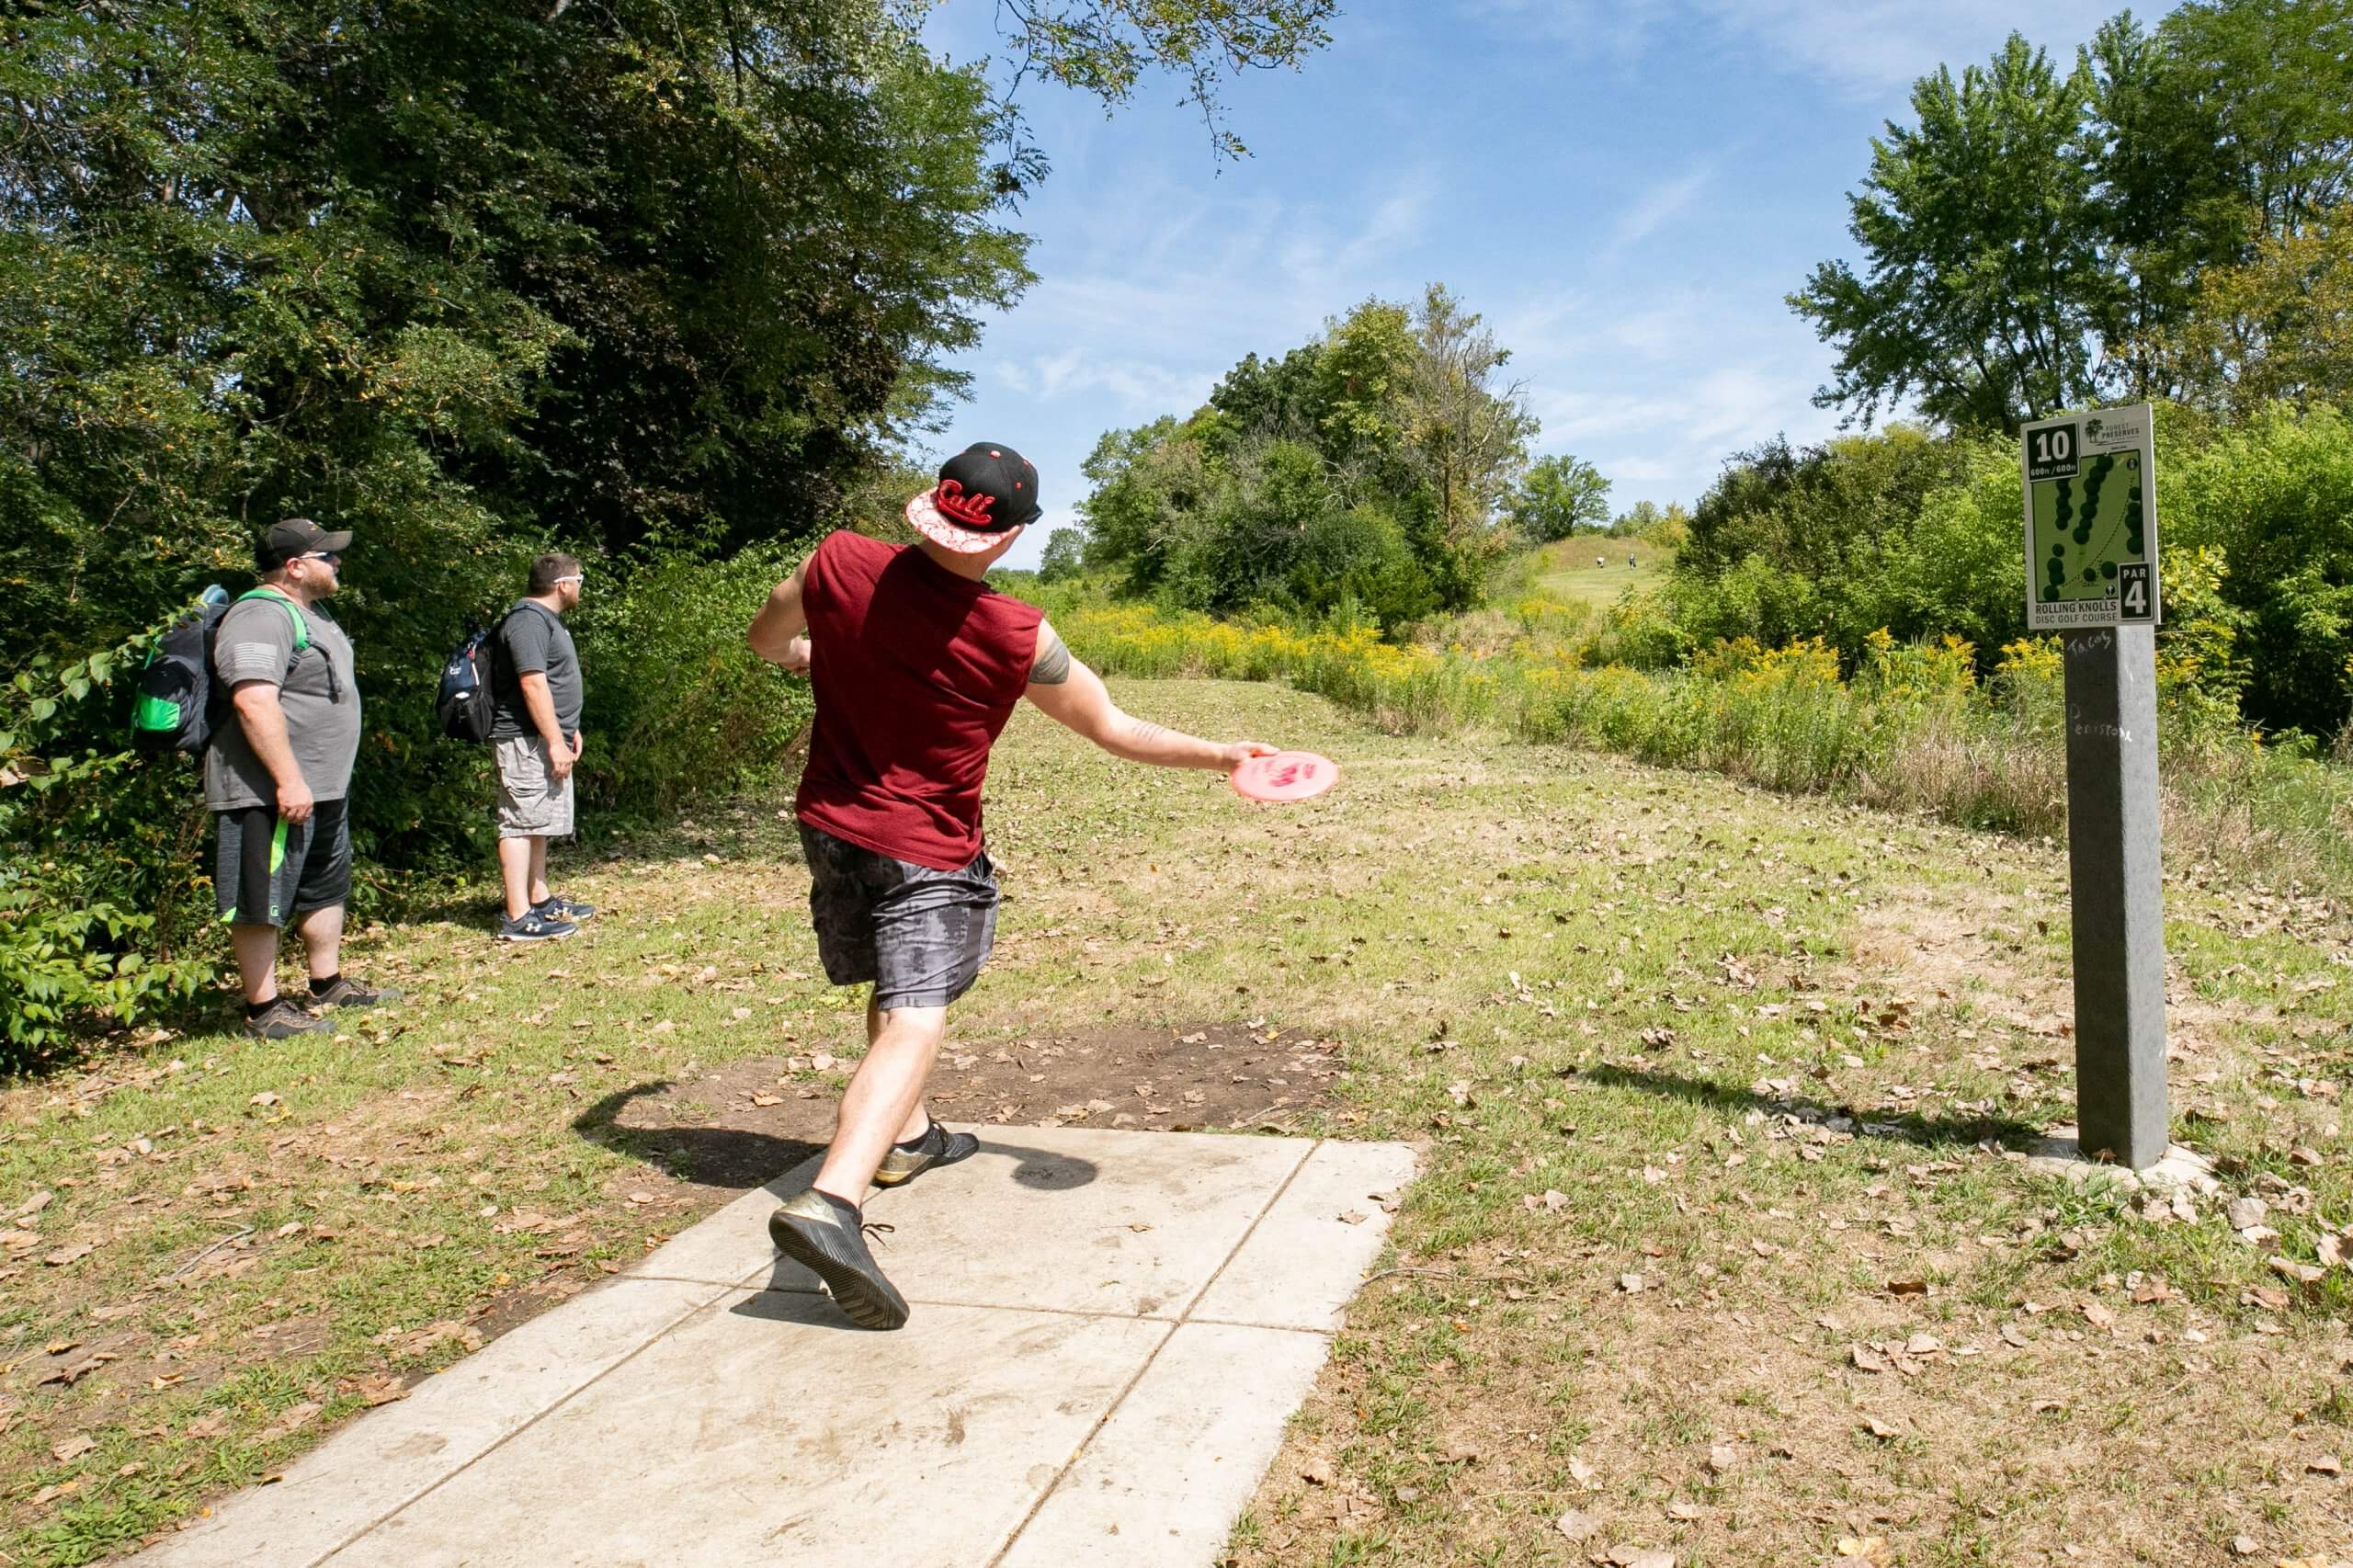 Disc Golf at Rolling Knolls Forest Preserve